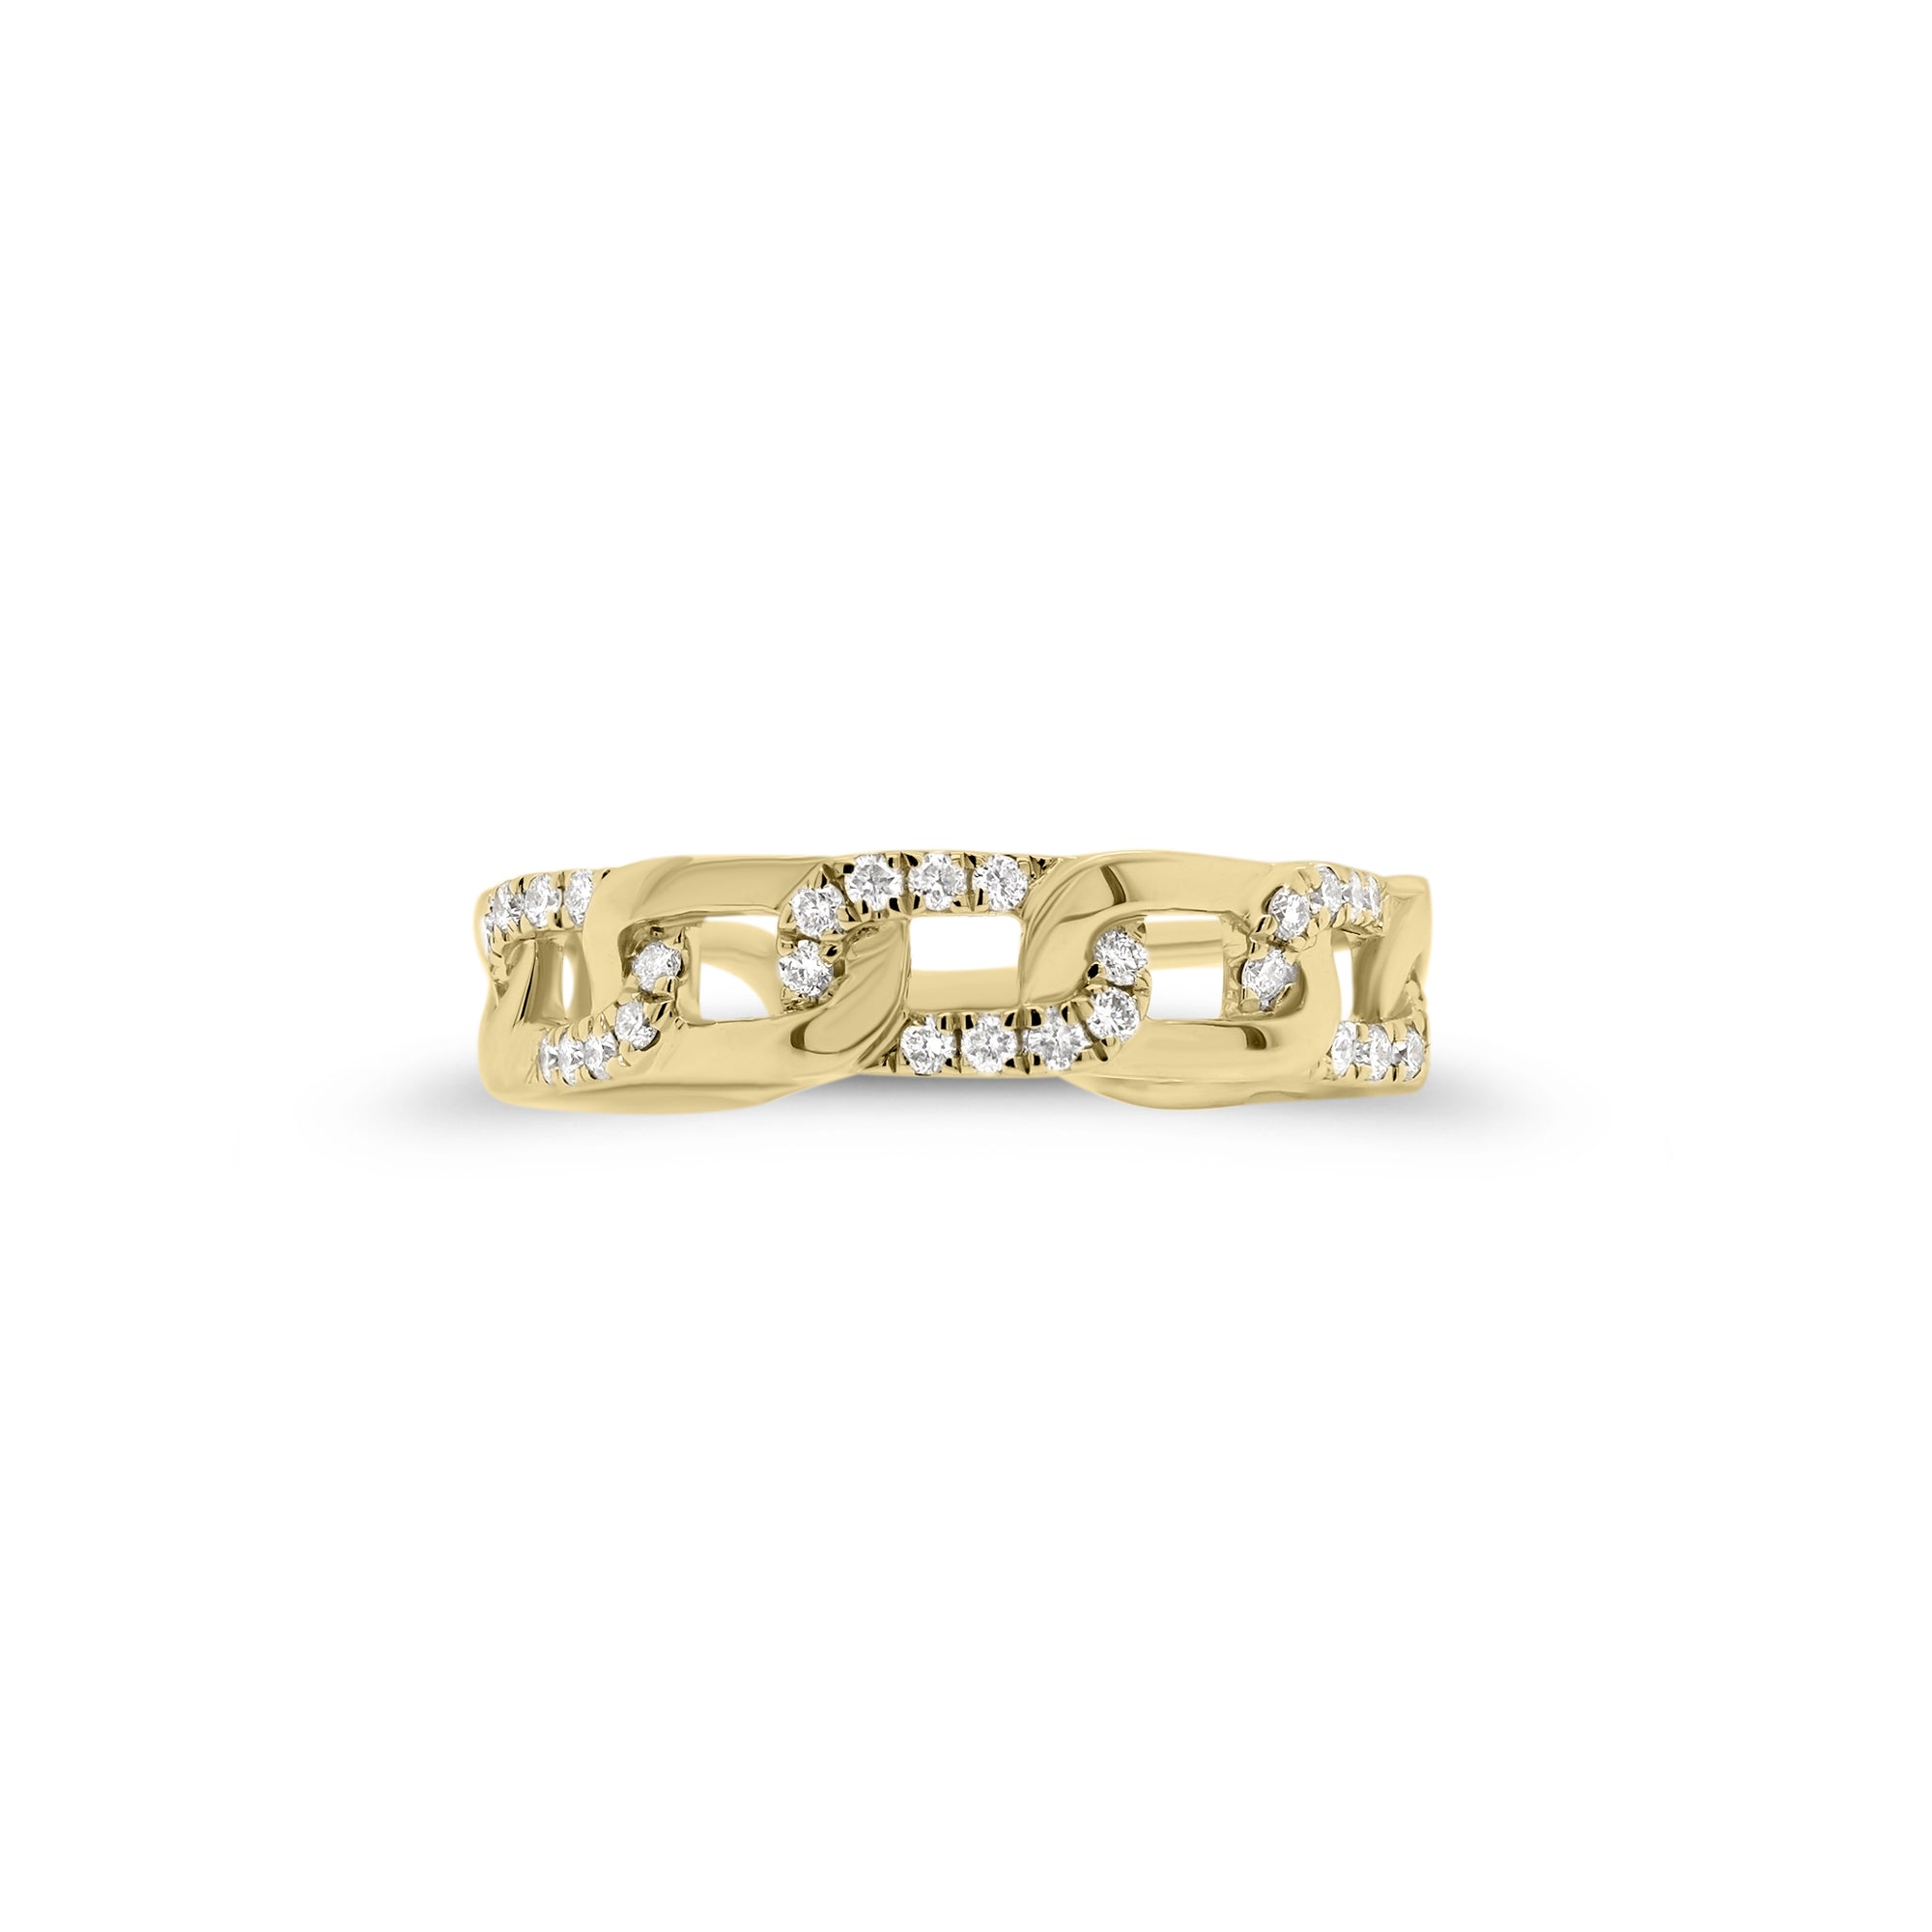 Diamond Curb Chain Stackable Ring  - 18K gold weighing 3.41 grams  - 30 round diamonds totaling 0.19 carats